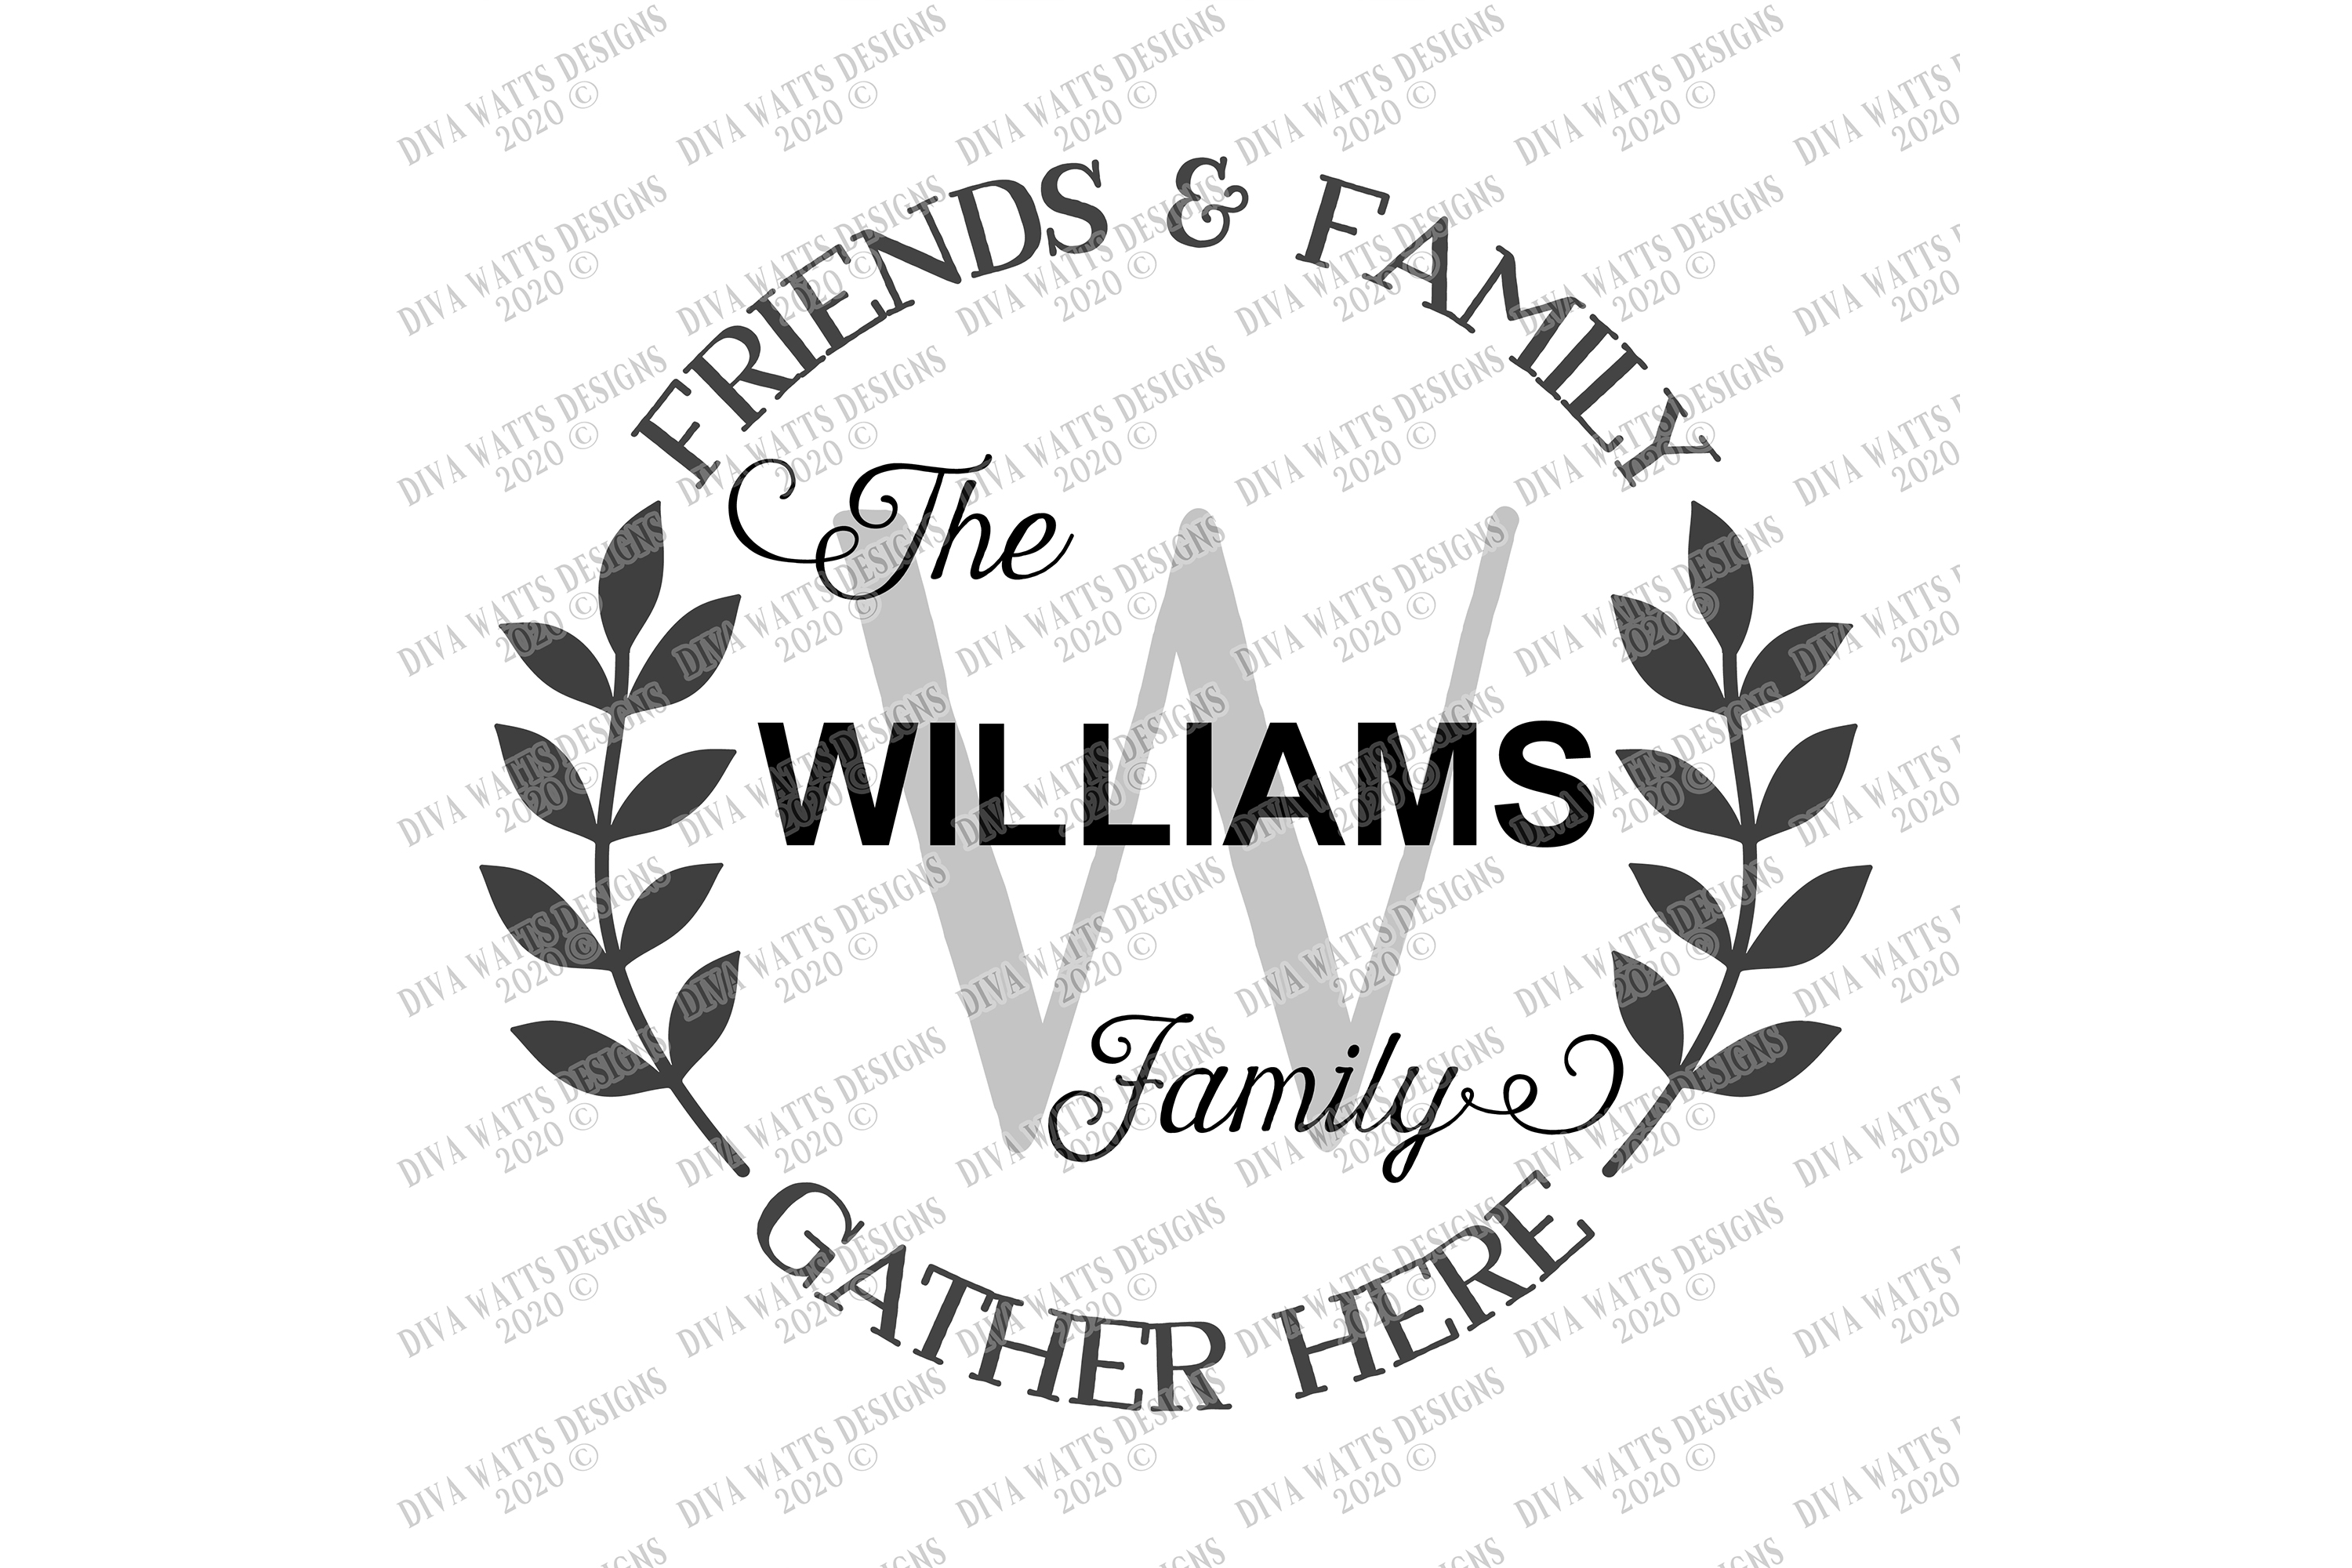 Download Friends and Family Gather Here - Monogram - Last Name SVG